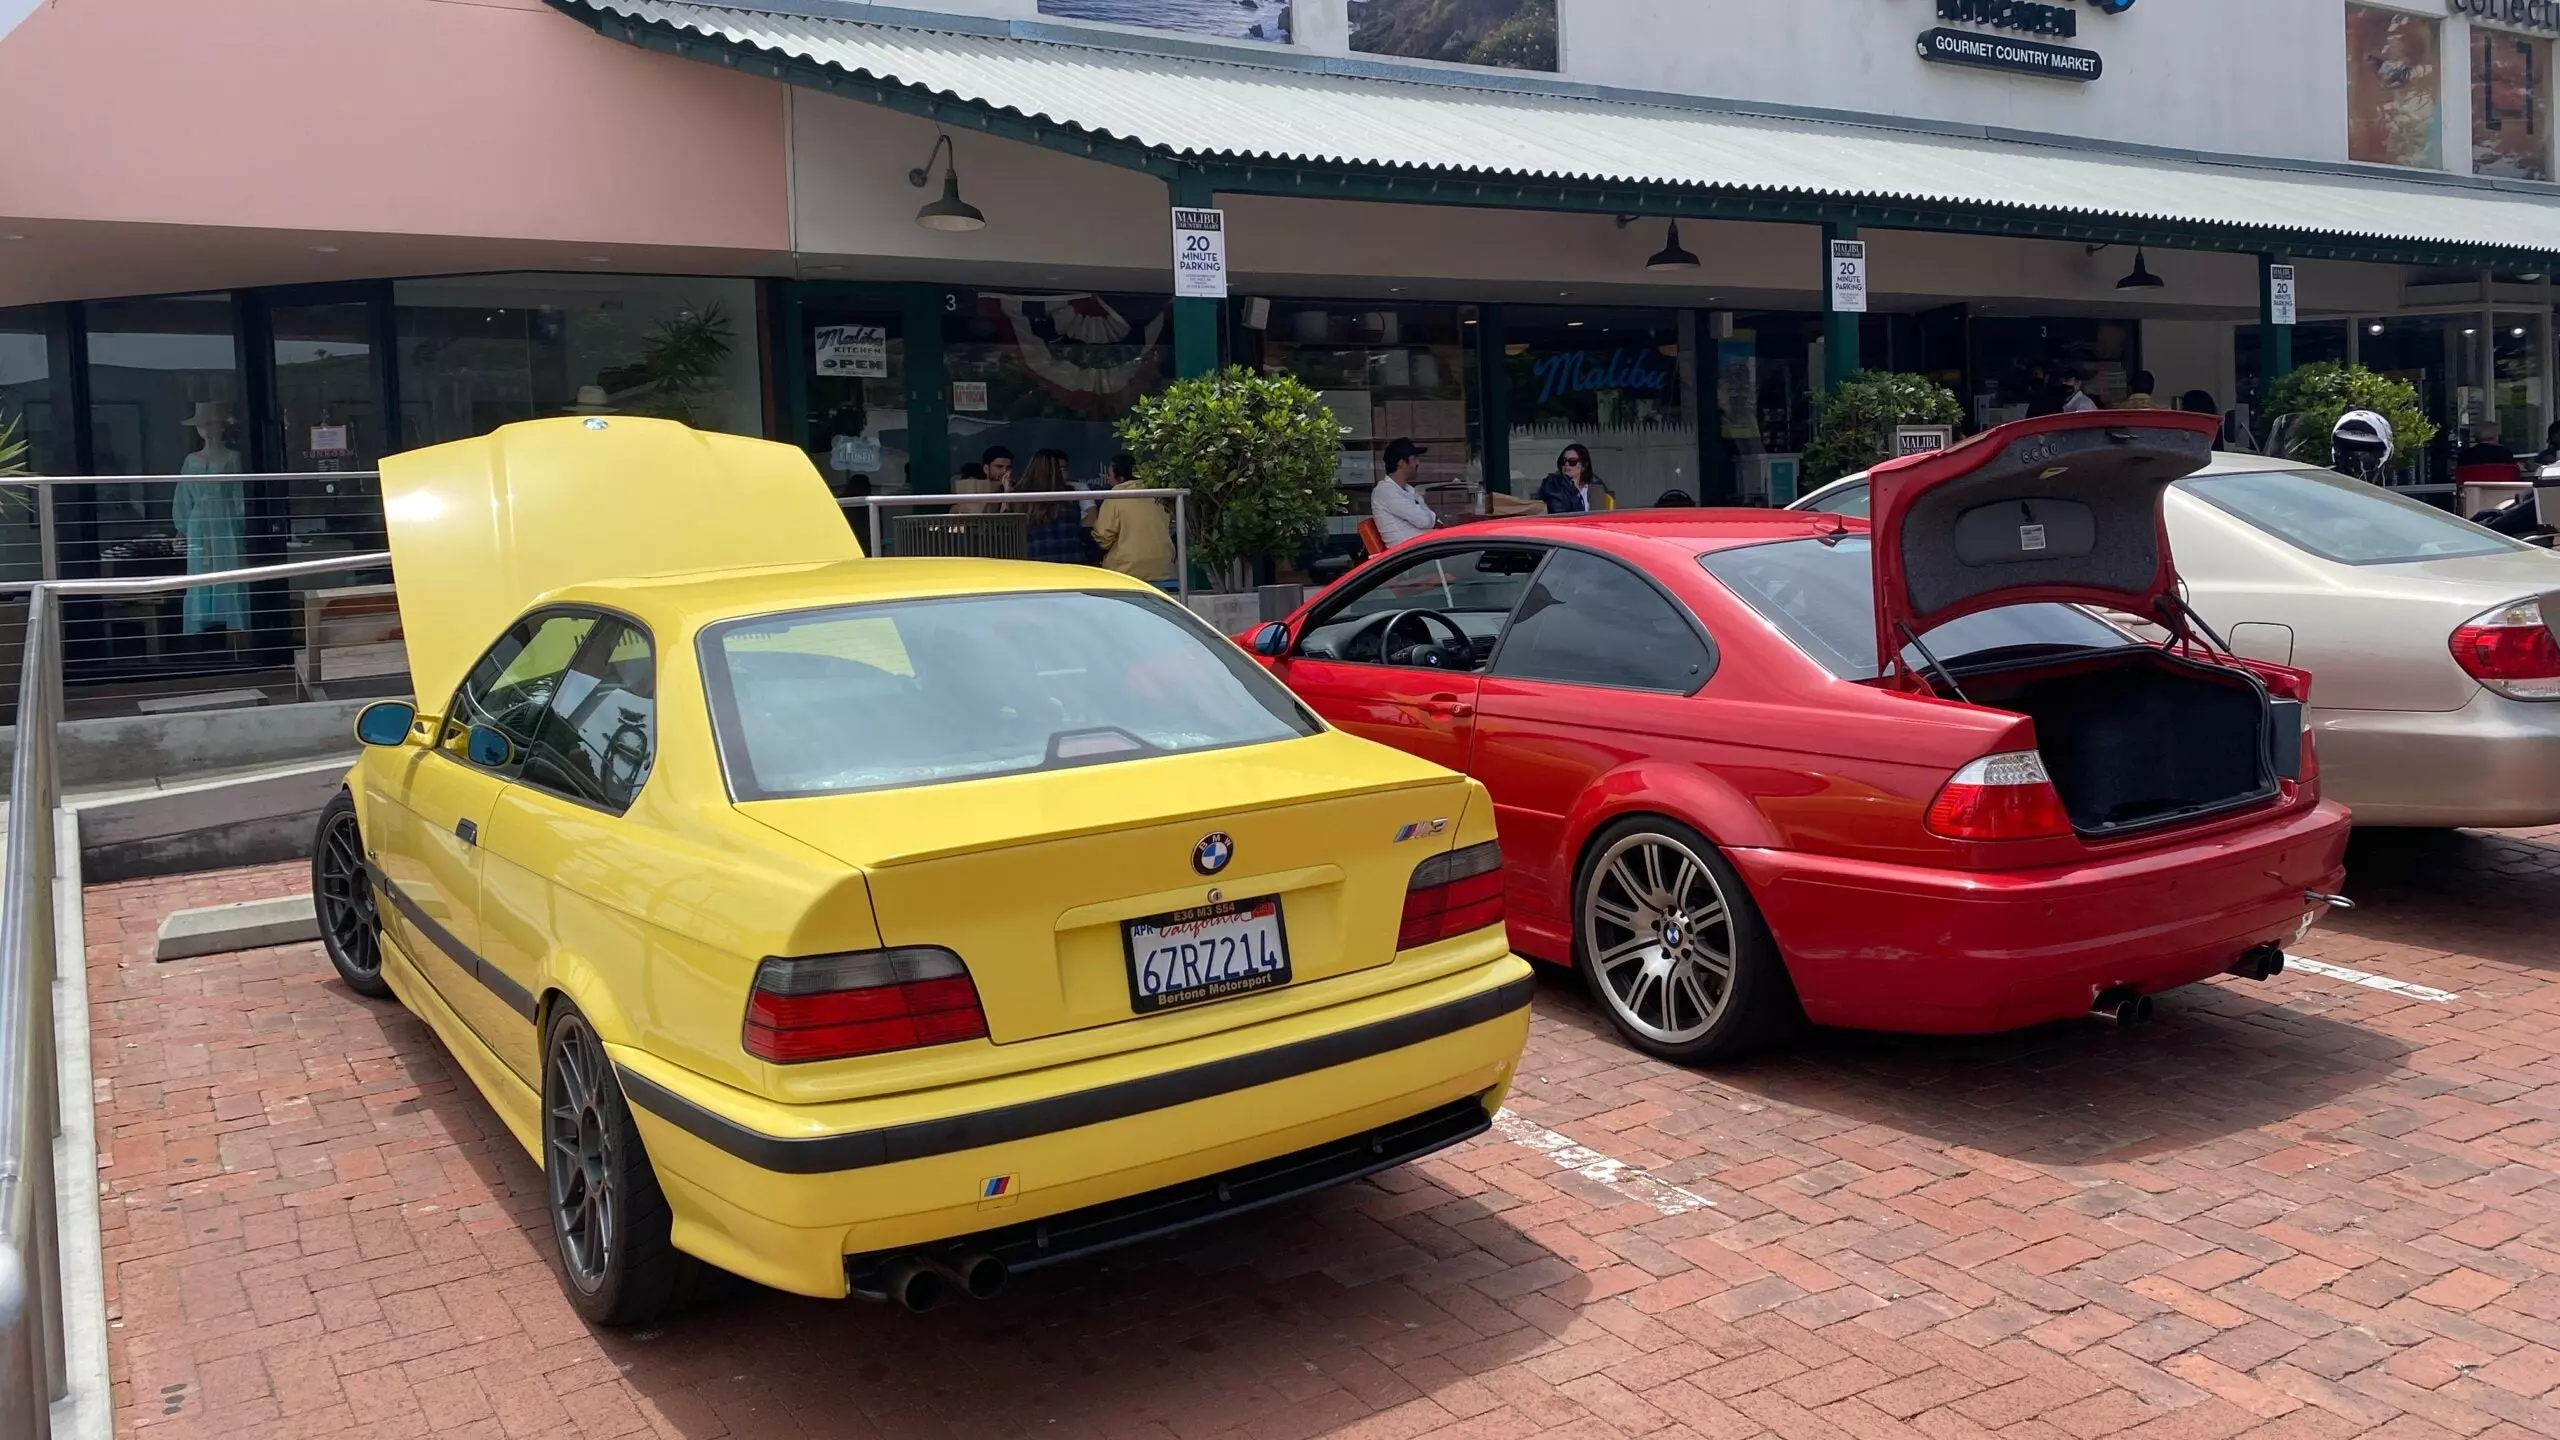 Enjoy a Mustard and Ketchup Pairing of M3s | Autance